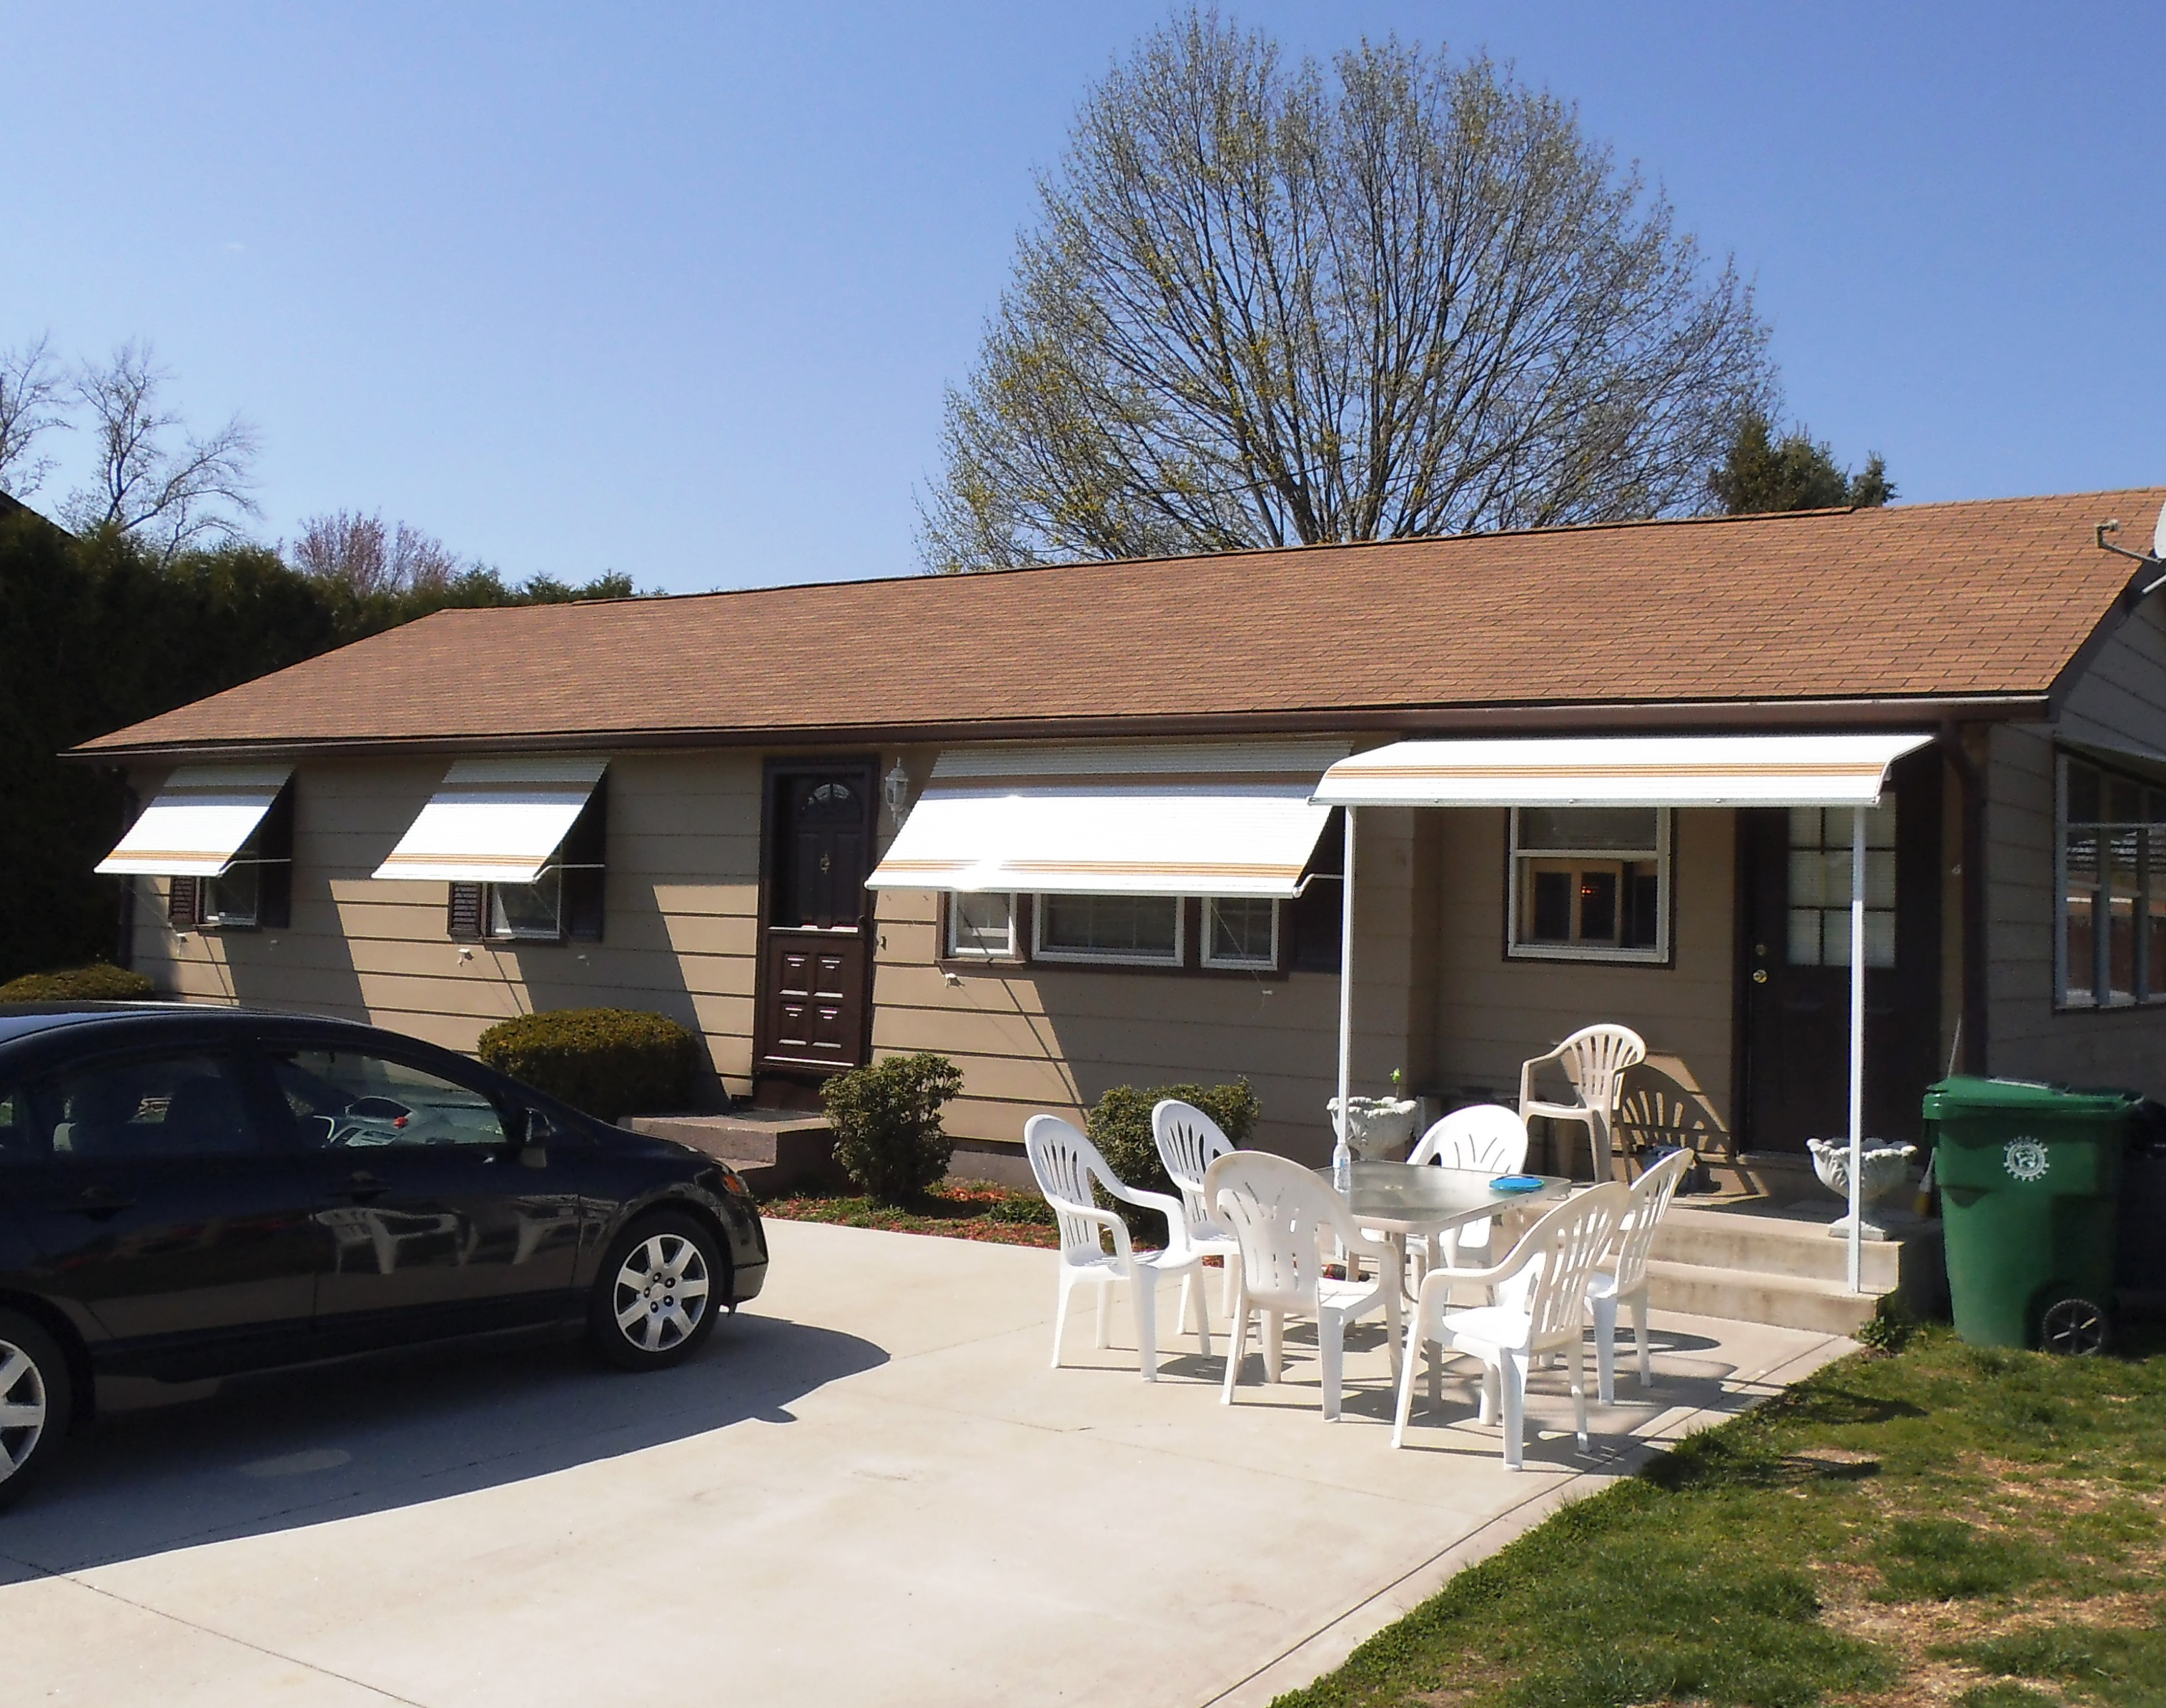 Aluminum Window RollUp, Doorway Awnings, & Canopies Gallery Leisure Time Awnings